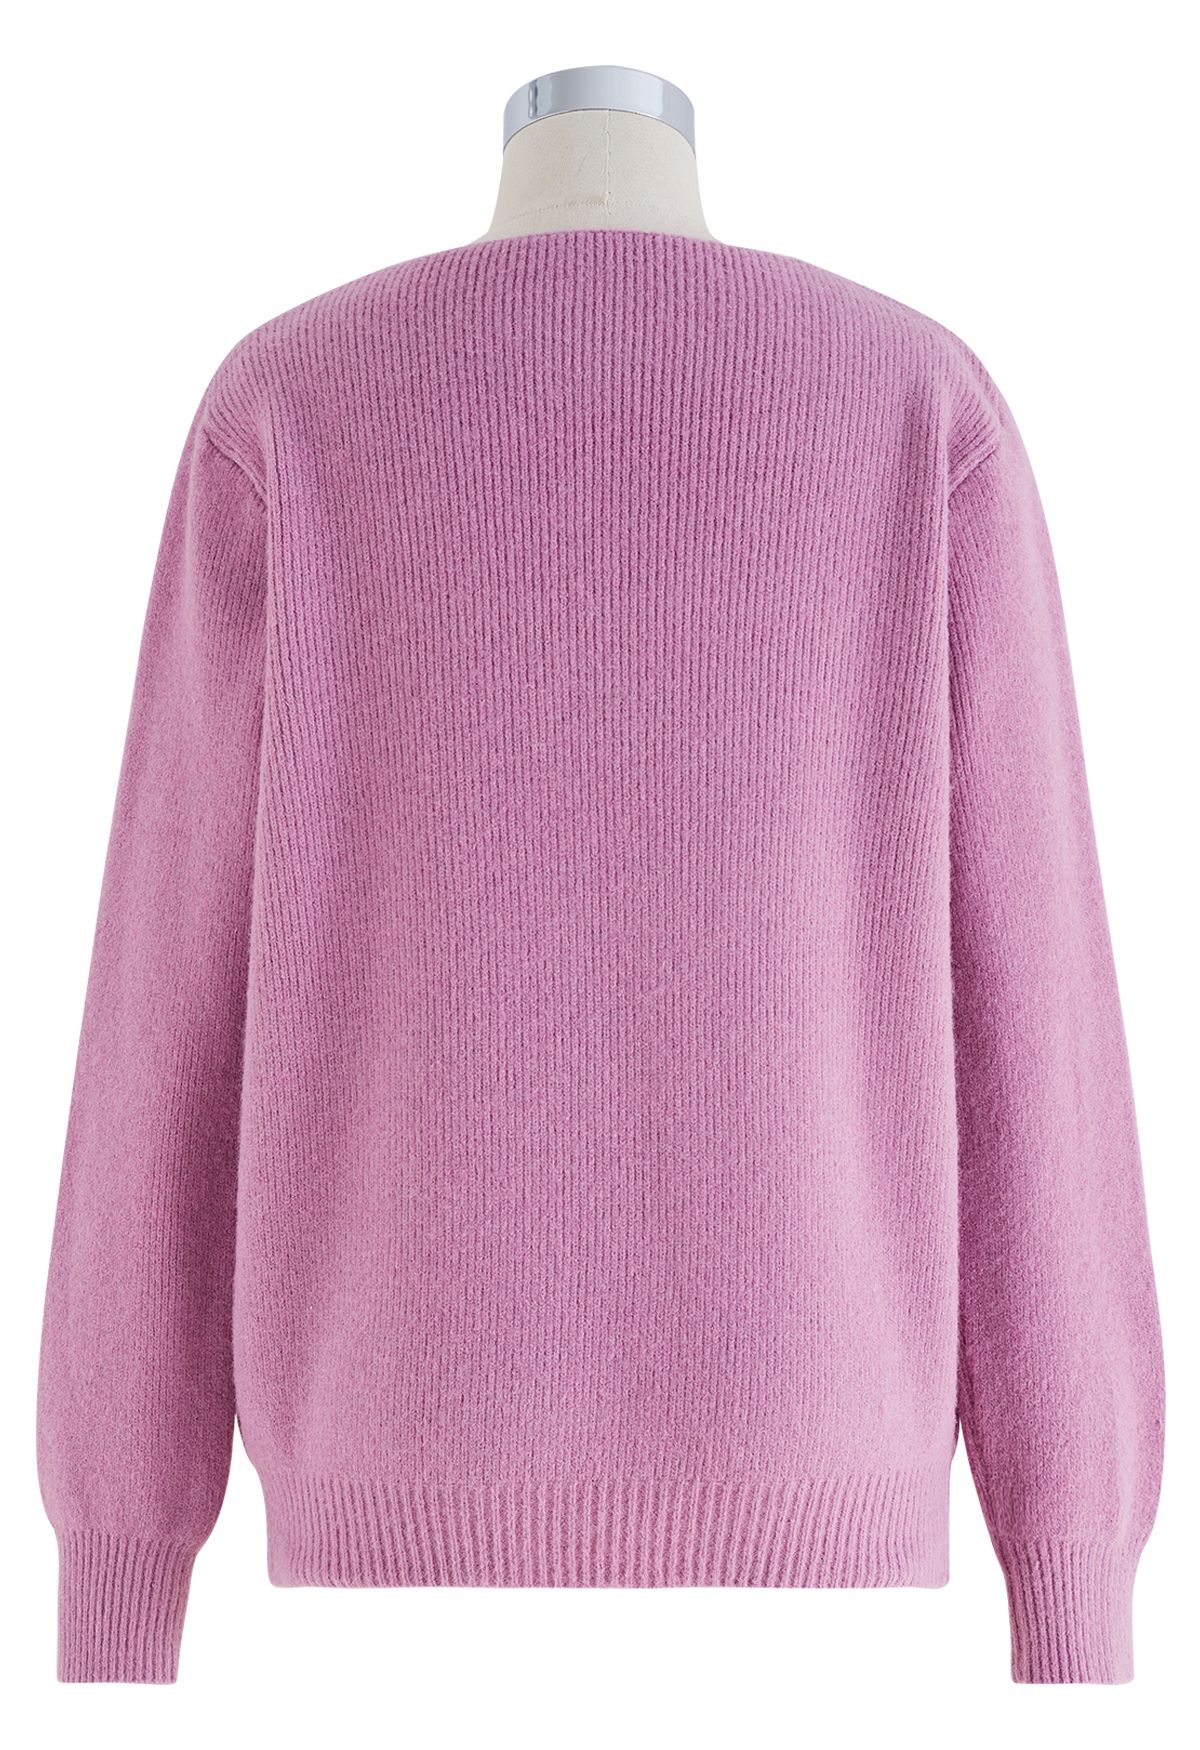 Cutout Pearl Neckline Knit Sweater in Pink